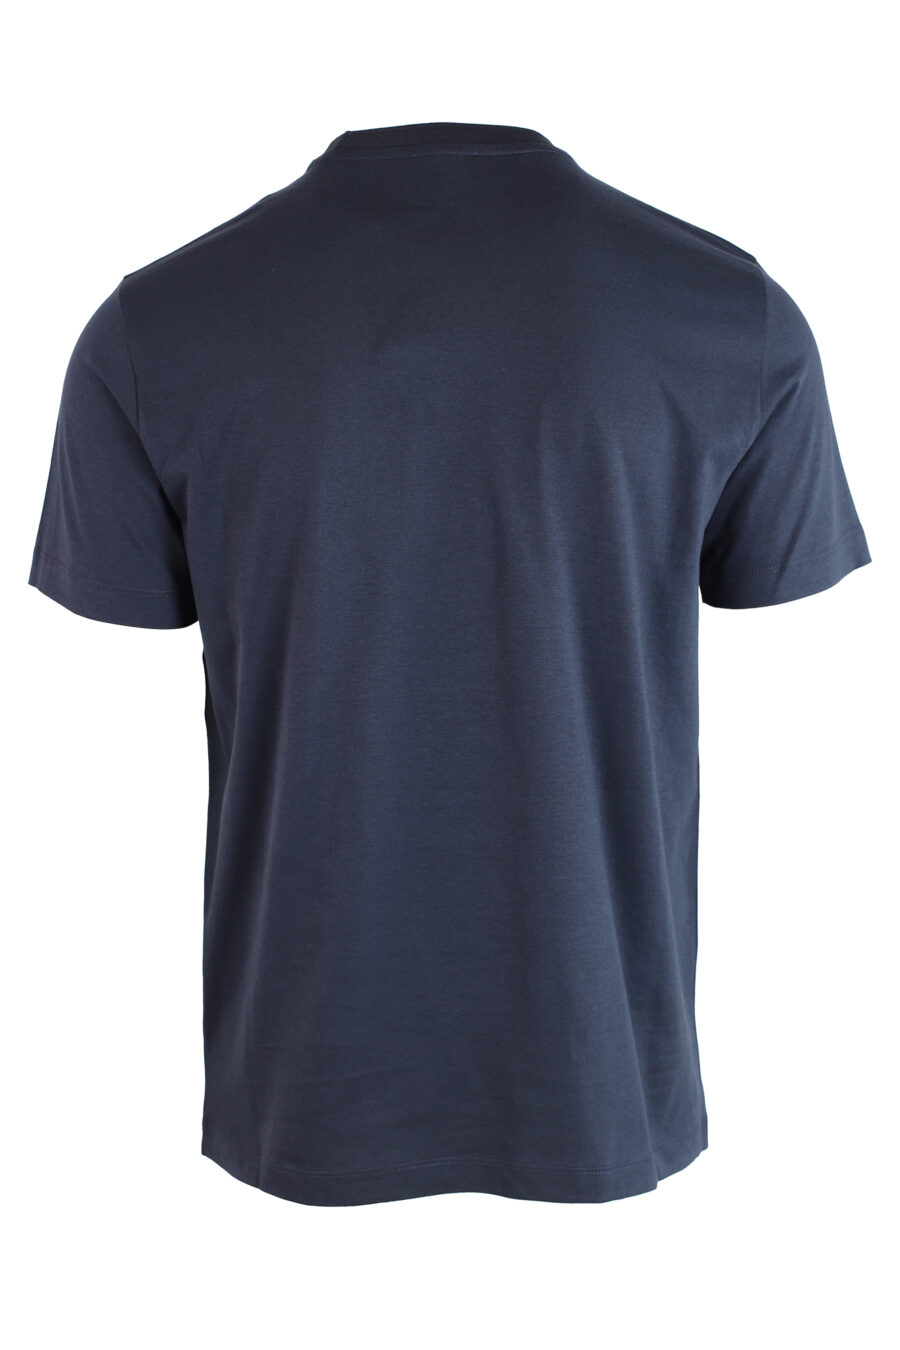 Dark blue T-shirt with mini logo in gold patch - IMG 3224